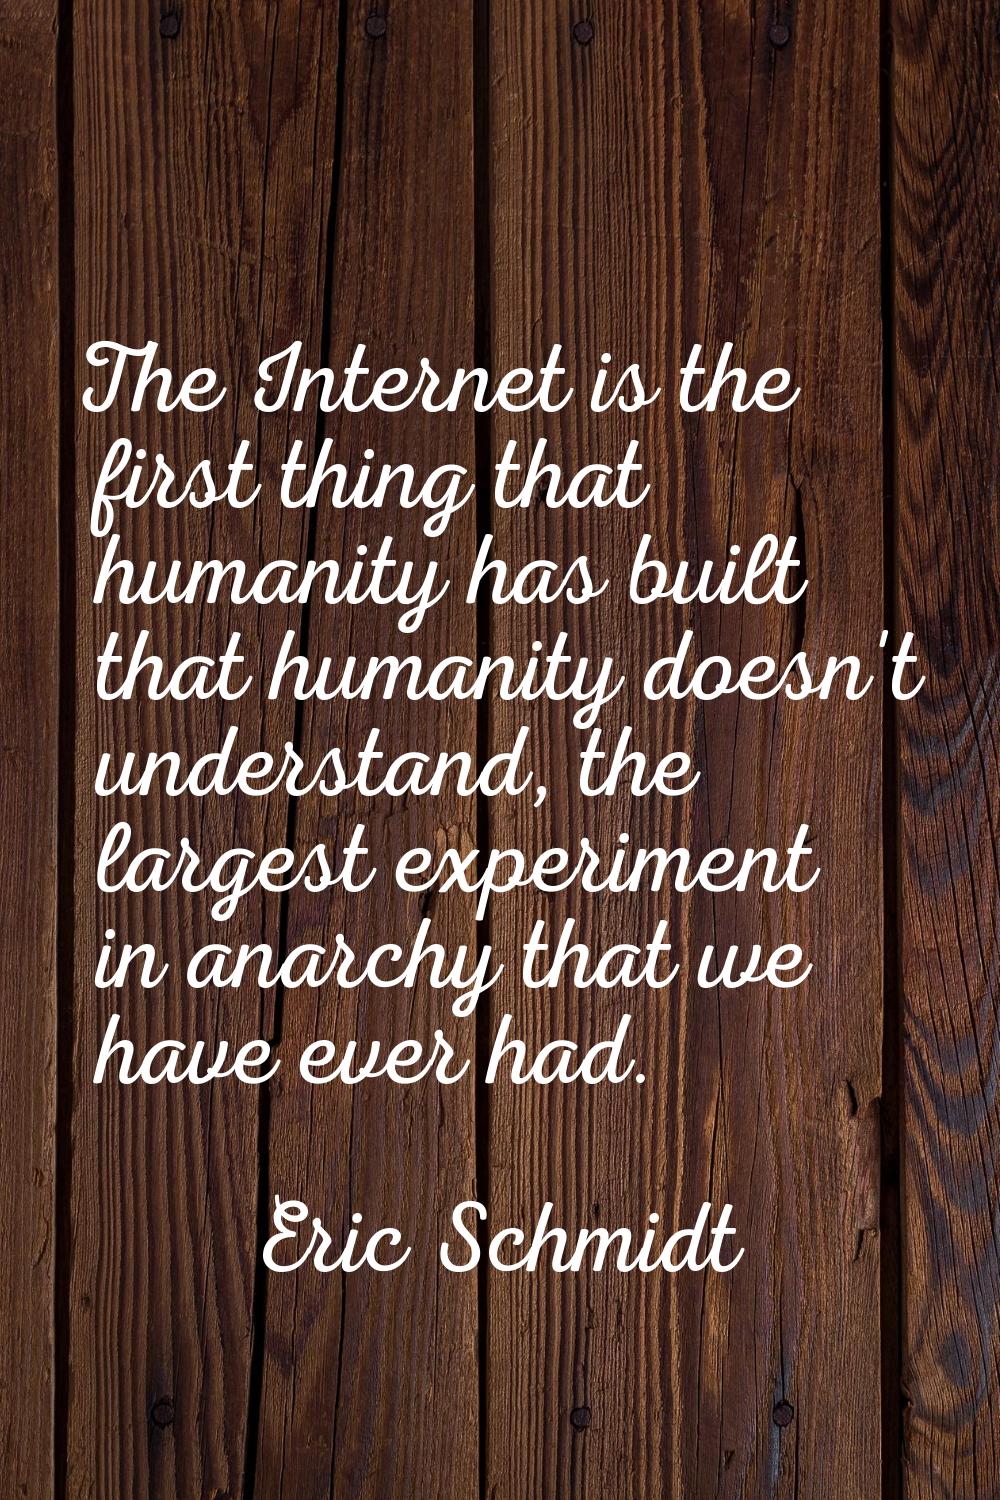 The Internet is the first thing that humanity has built that humanity doesn't understand, the large